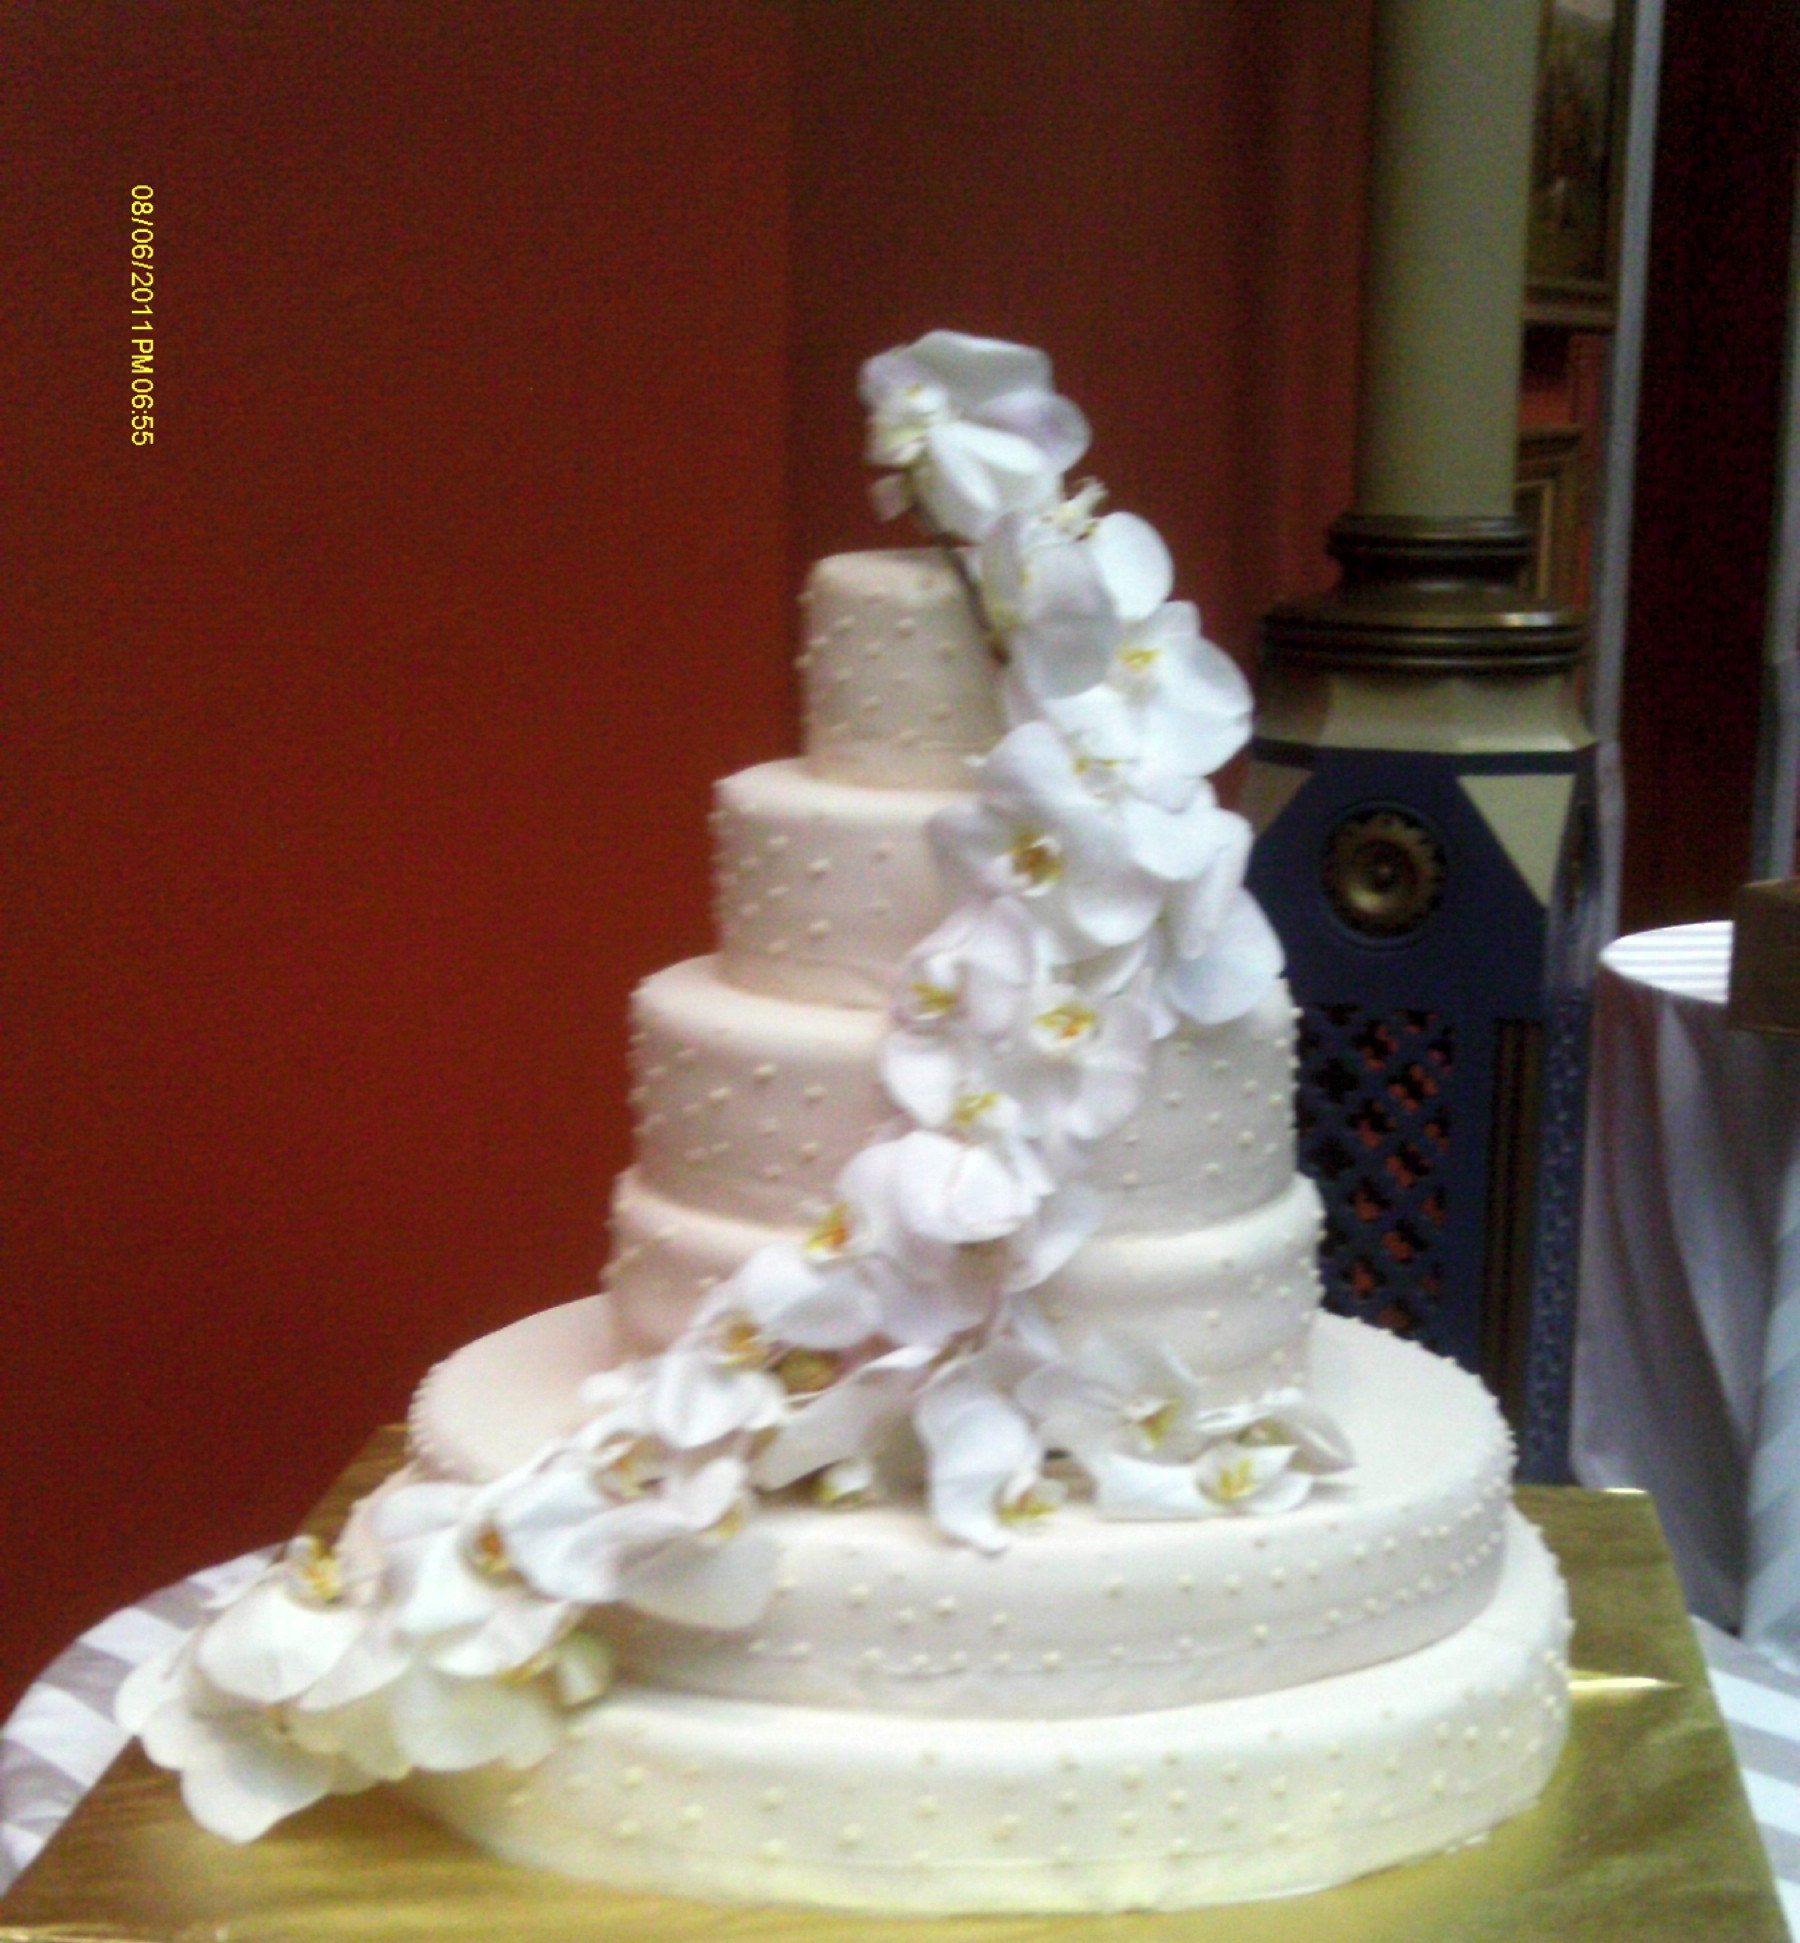 6 Layer Wedding Cakes
 Two totally different wedding cakes